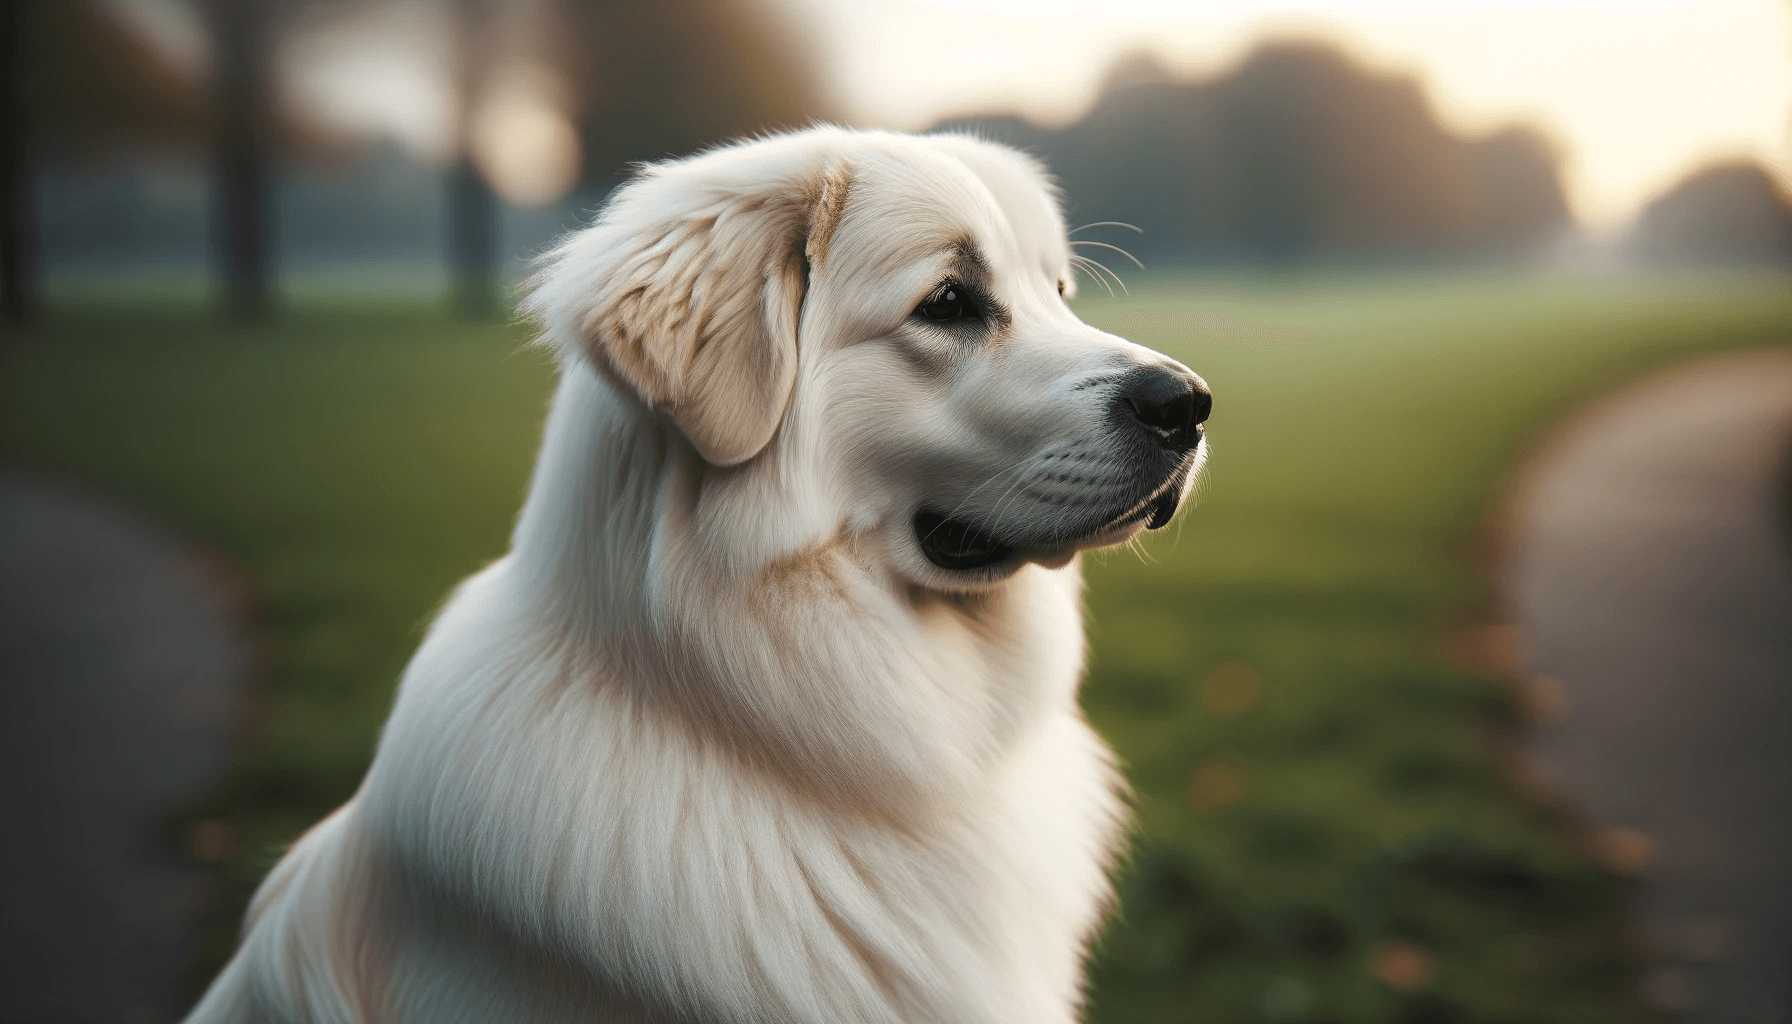 Pyrenees Lab Mix dog is shown in profile, looking sideways with a serene expression. It has medium-length creamy white fur, a robust build, and slight